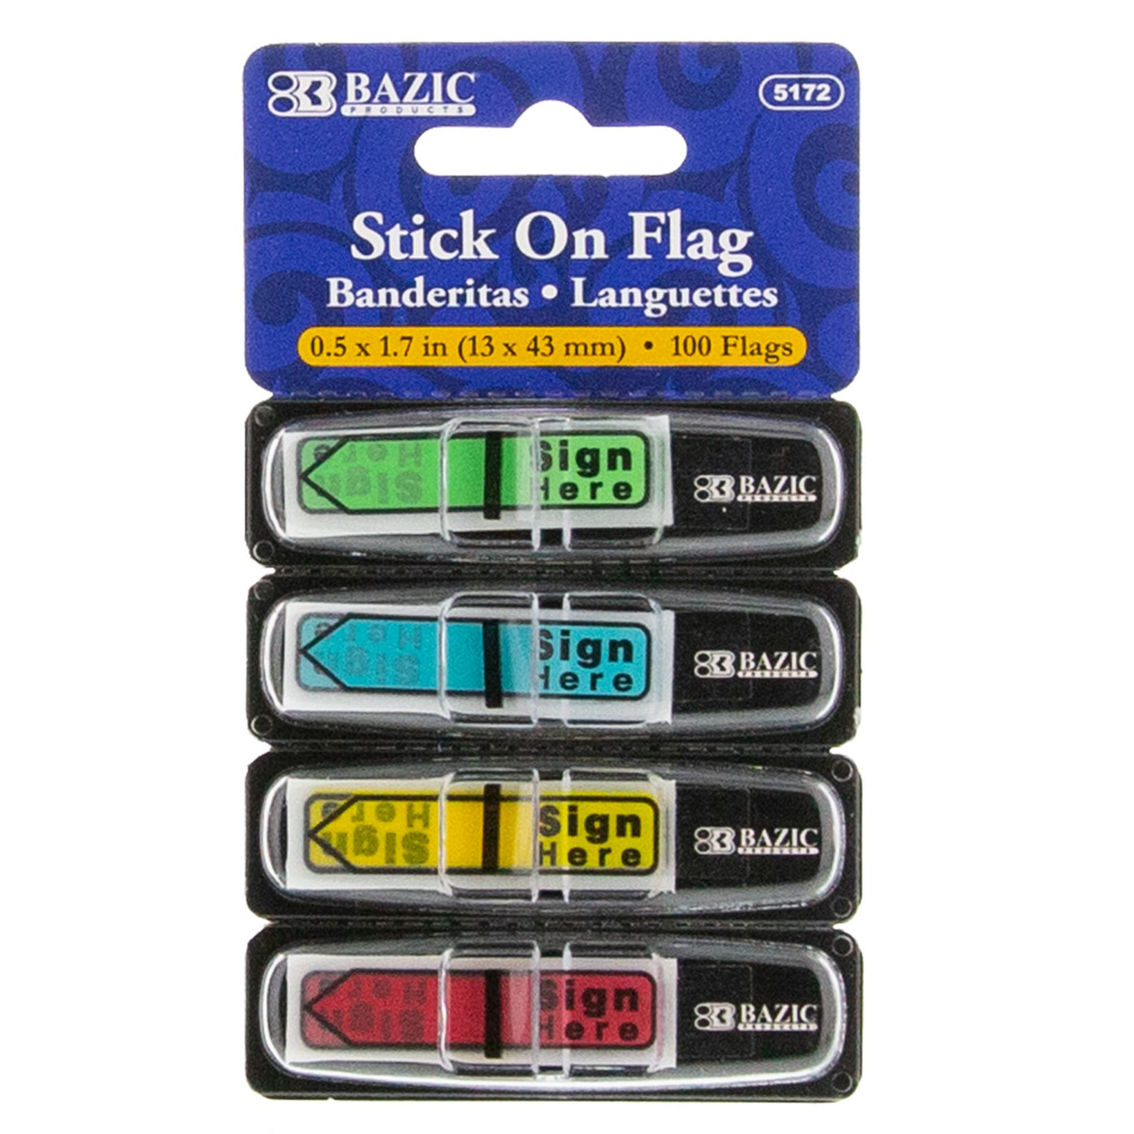 BAZIC Products® Neon Printed Sign Here Flags with Dispenser, 100 Per Pack, 12 Packs - Image 2 of 5